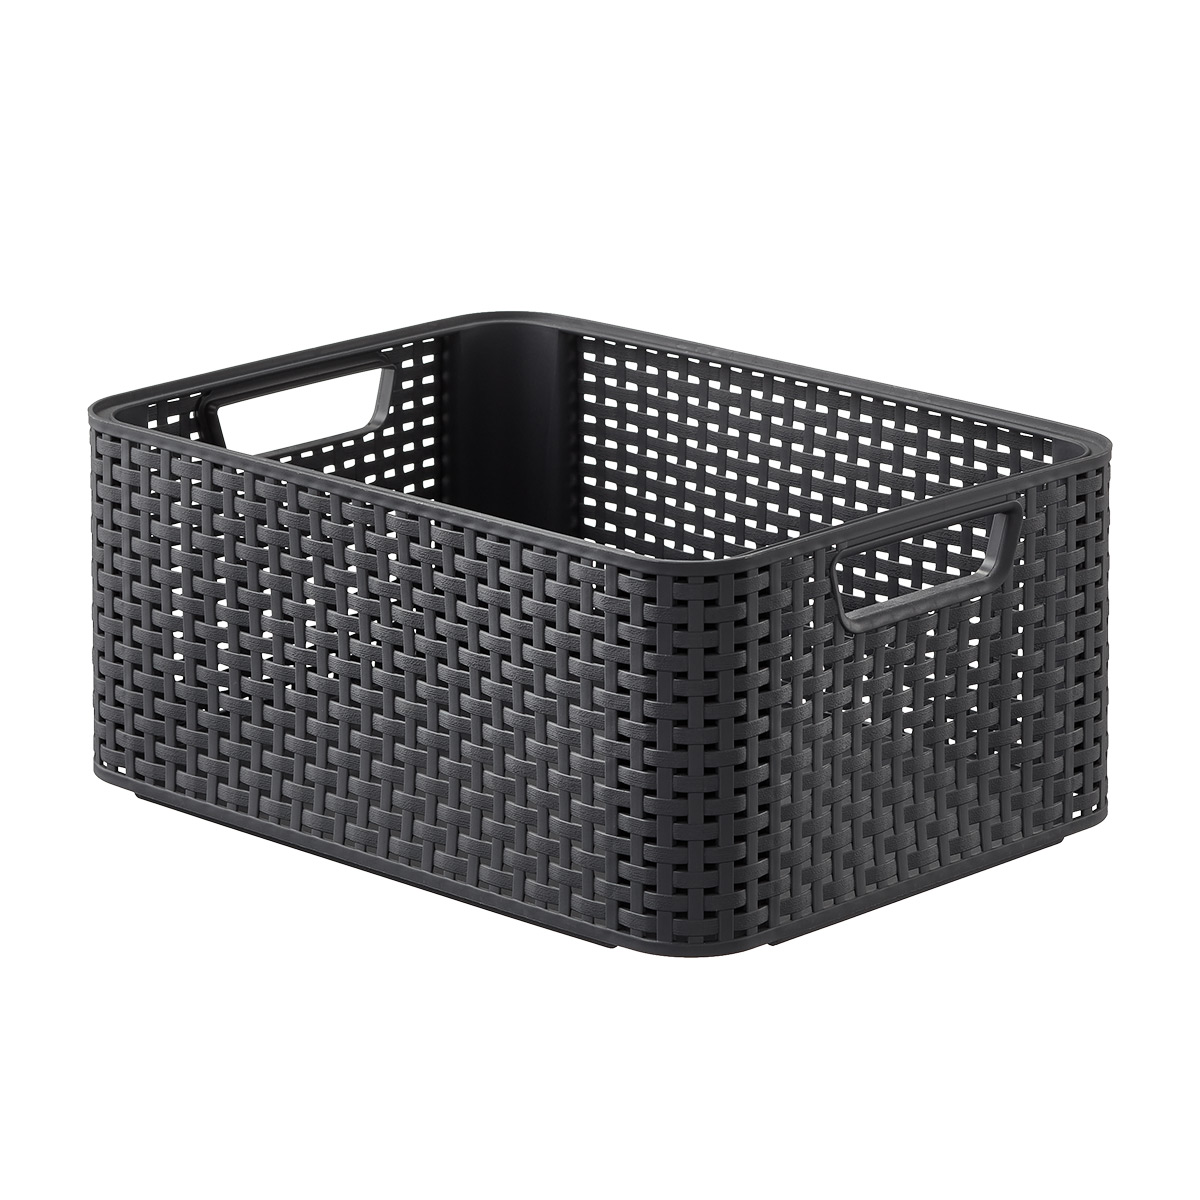 Curver White Basketweave Bin with Handles | The Container Store